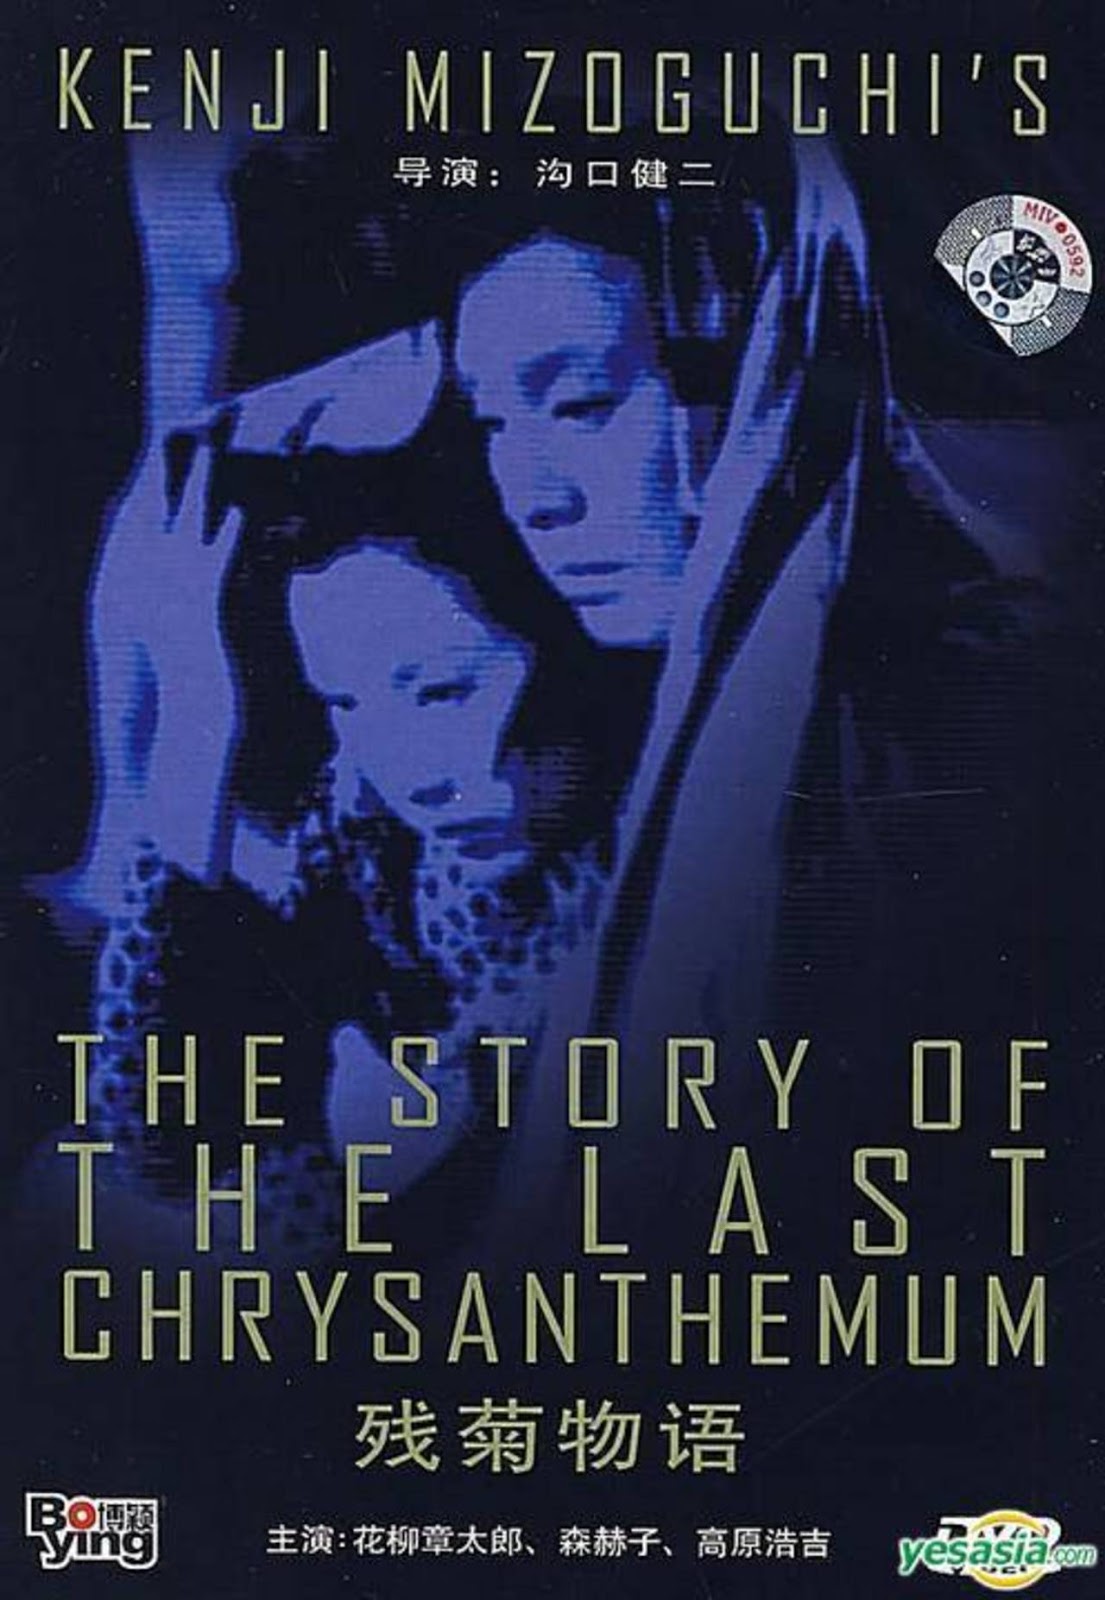 Happyotter: THE STORY OF THE LAST CHRYSANTHEMUMS 1939